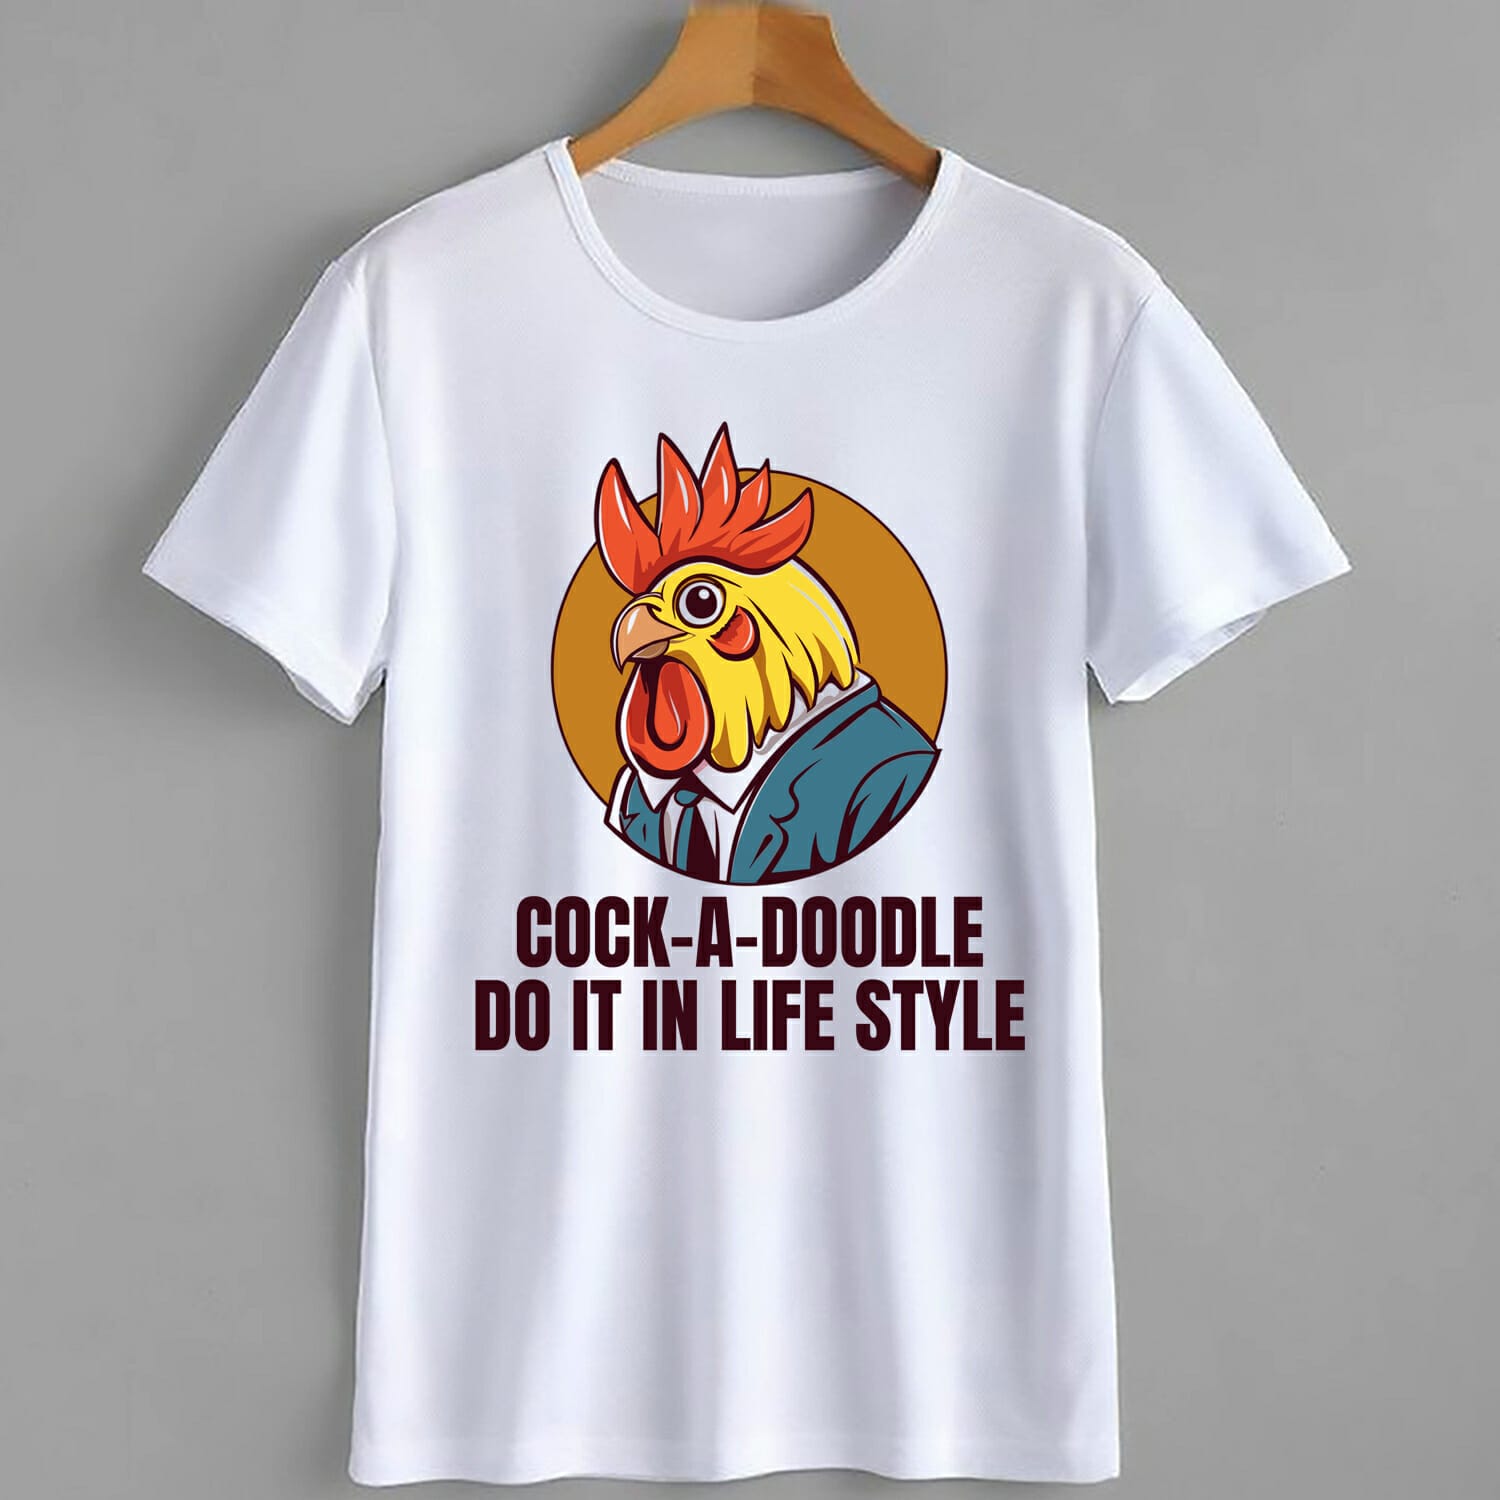 Free T-Shirt Design Cock A Doodle Do It In Life Style Rooster Suited For DTF, DTG, White Toner &  Sublimation Printing.